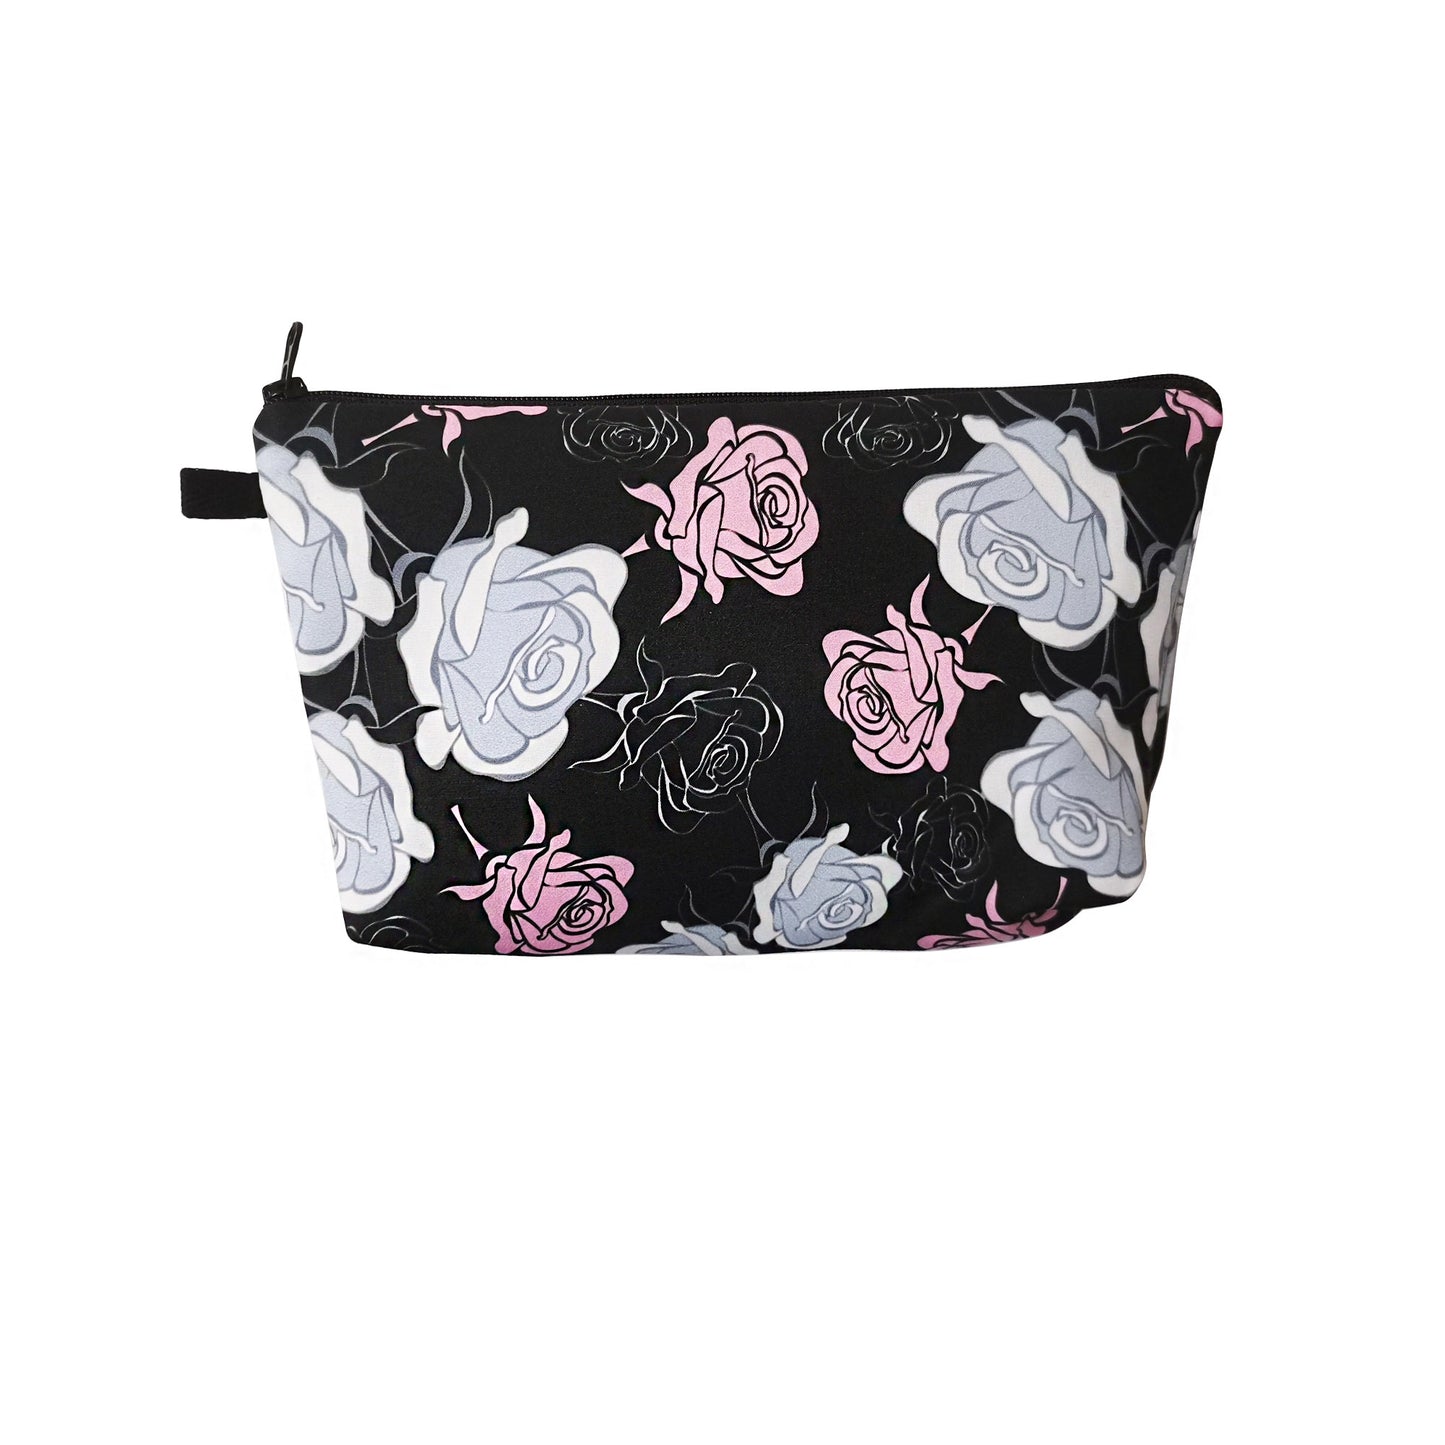 ROSE PRINTING MAKEUP POUCH 3111-51 (12PC)